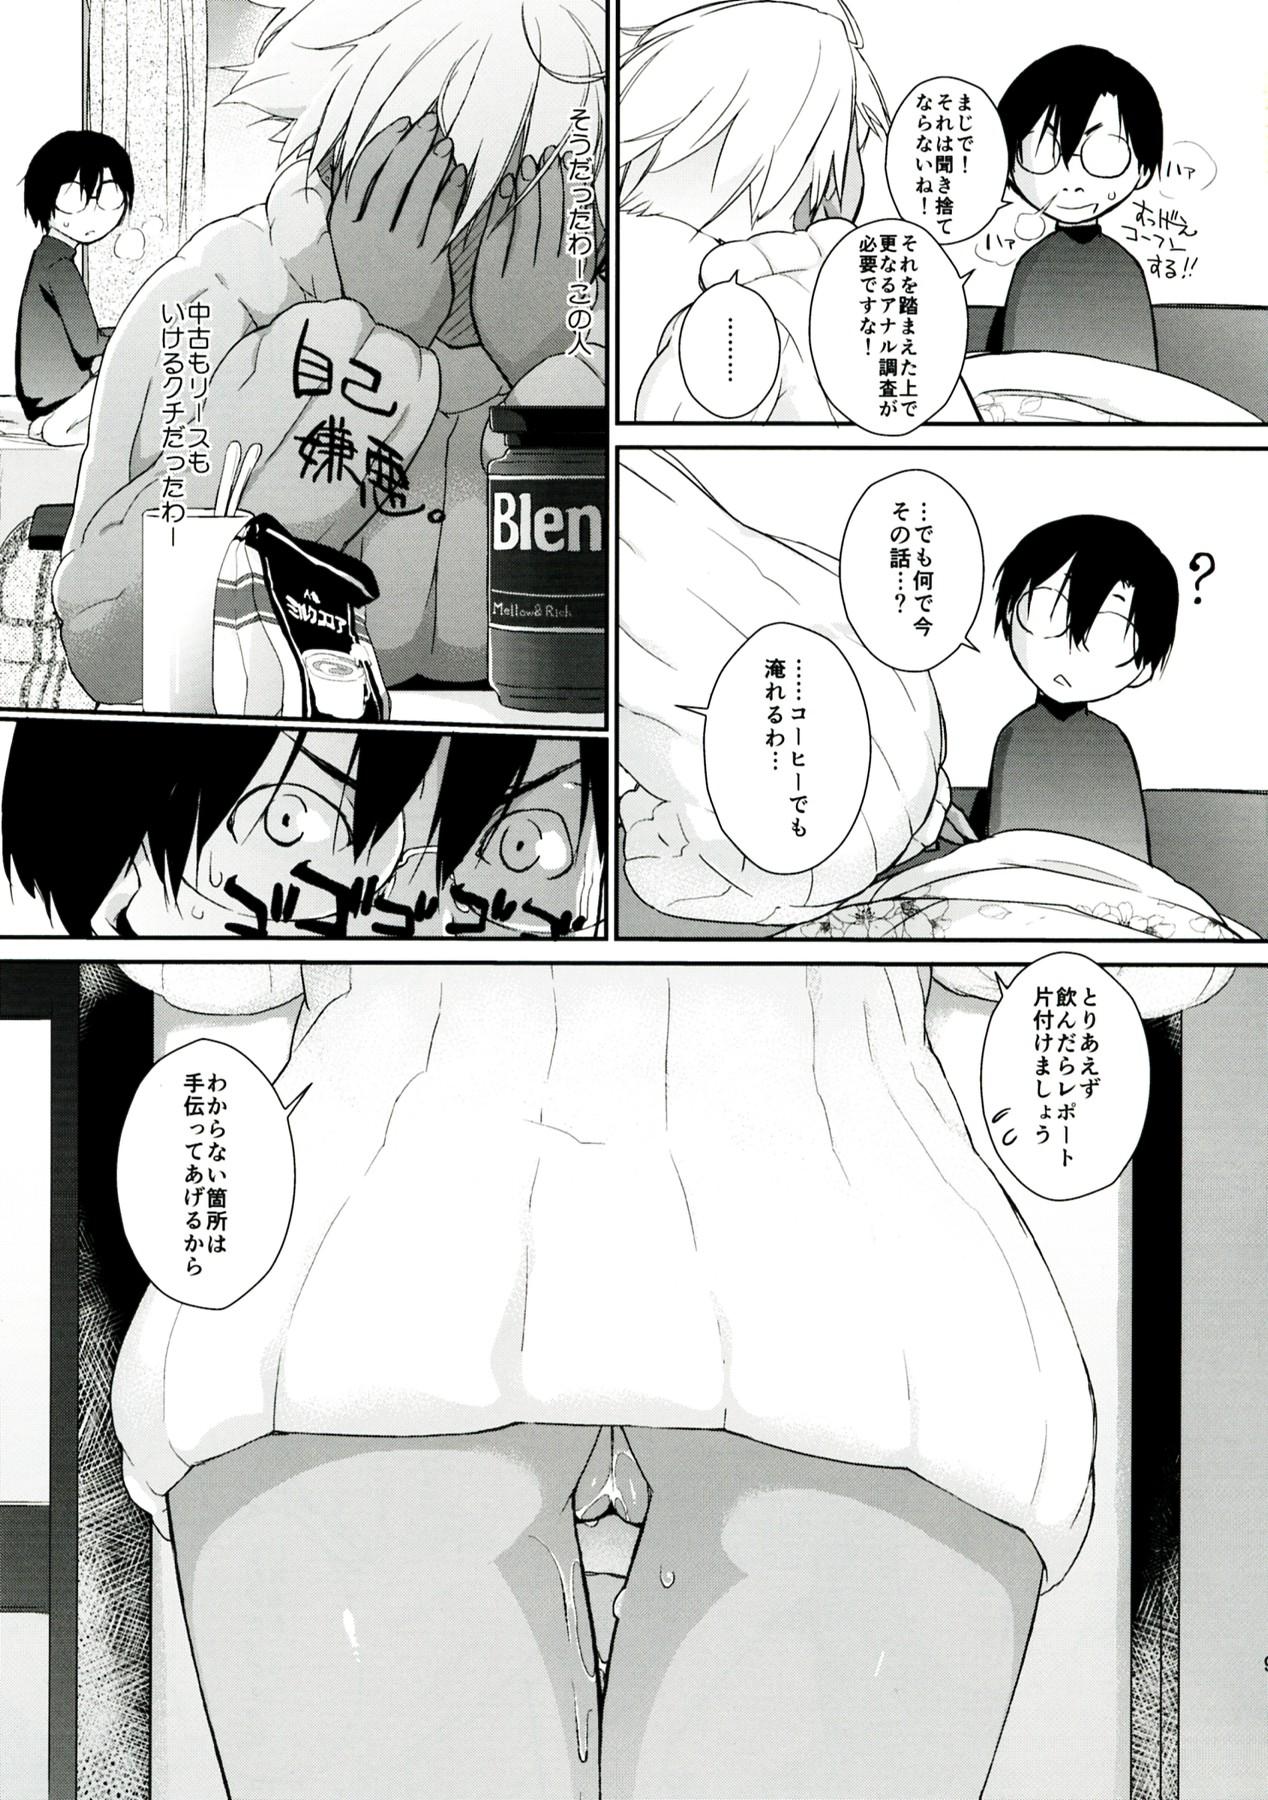 Farting 3ANGELS SHORT Full Blossom #01a MILK COCOA New - Page 9